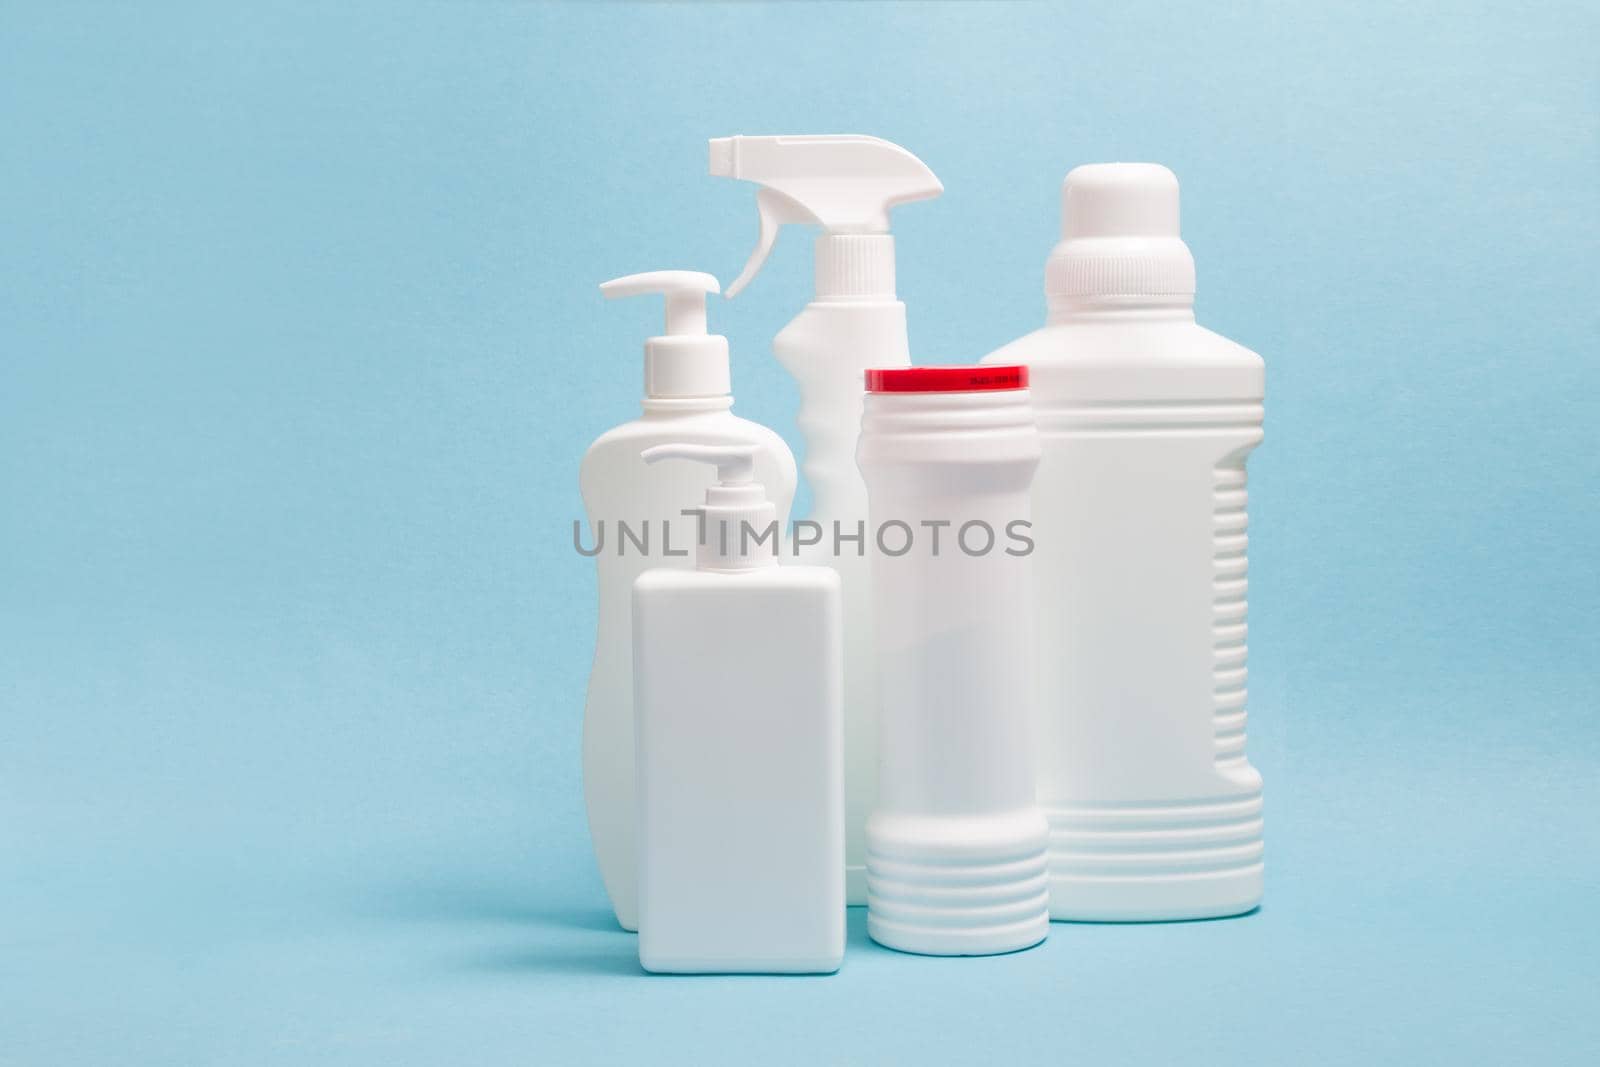 several white plastic bottles without labels with cleaning products on a blue background, washing gel, two bottles with dispensers, a spray bottle and a bottle with cleaning powder